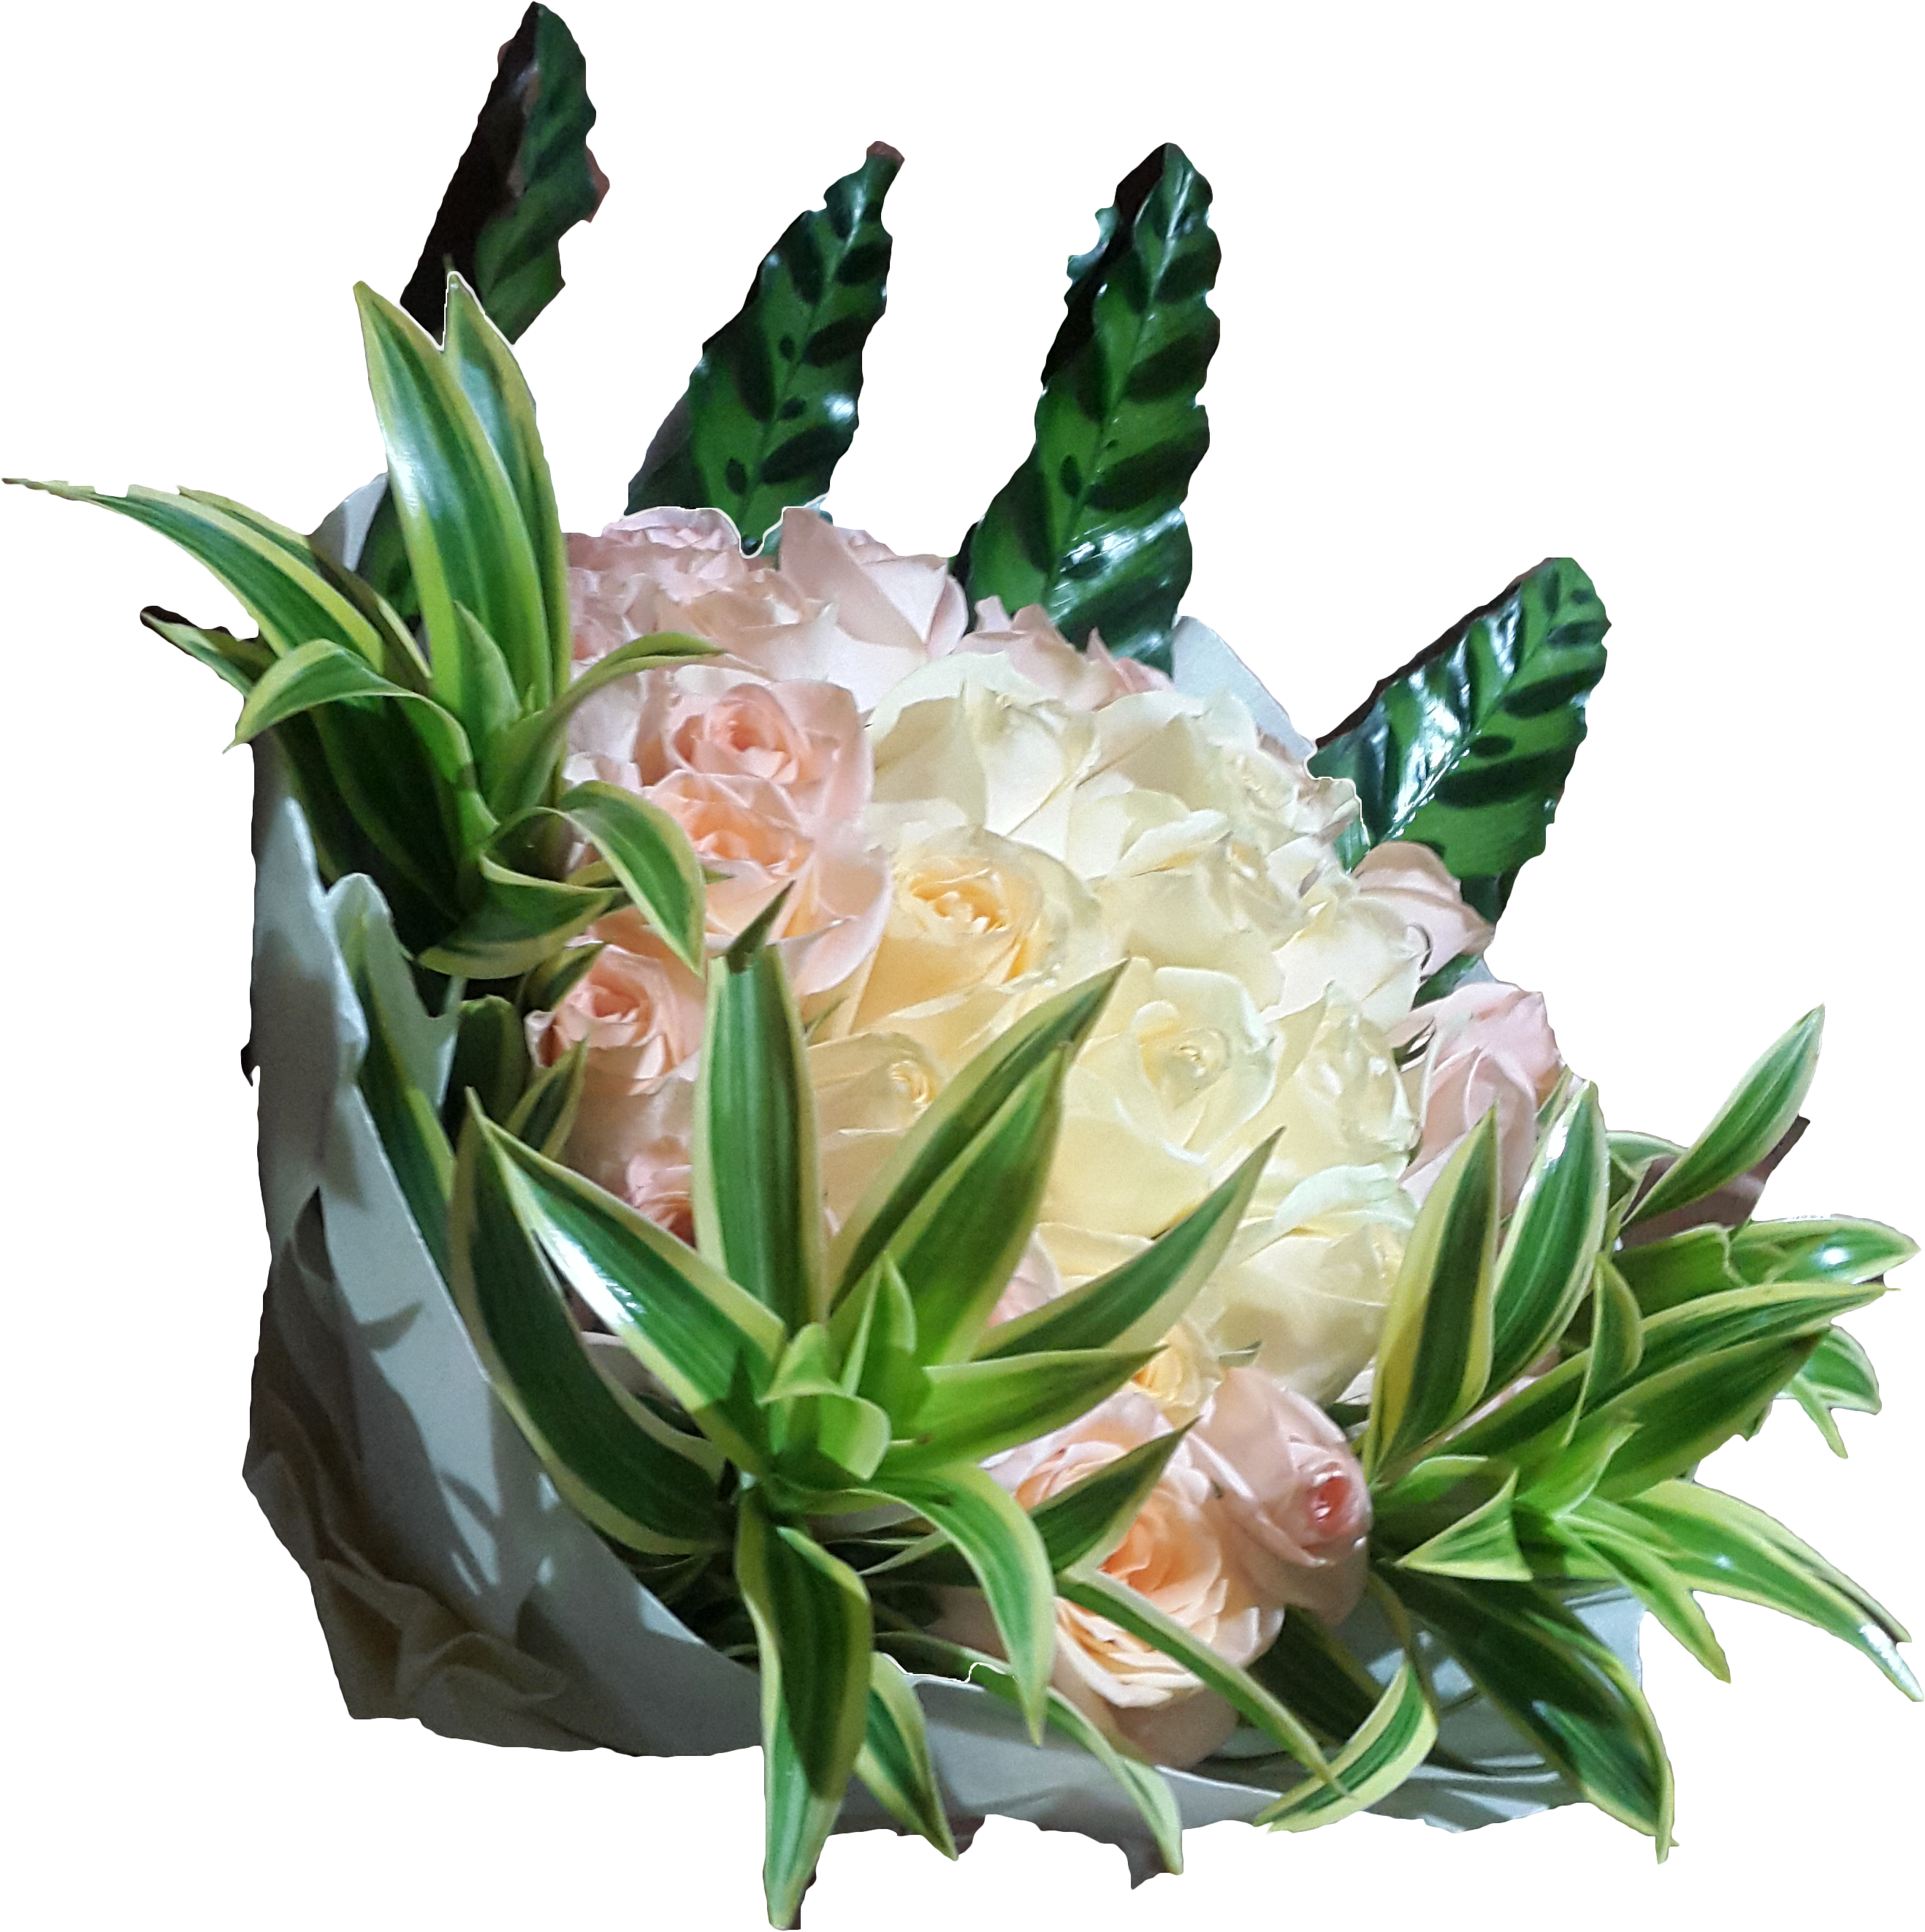 A Bouquet Of Flowers With Leaves